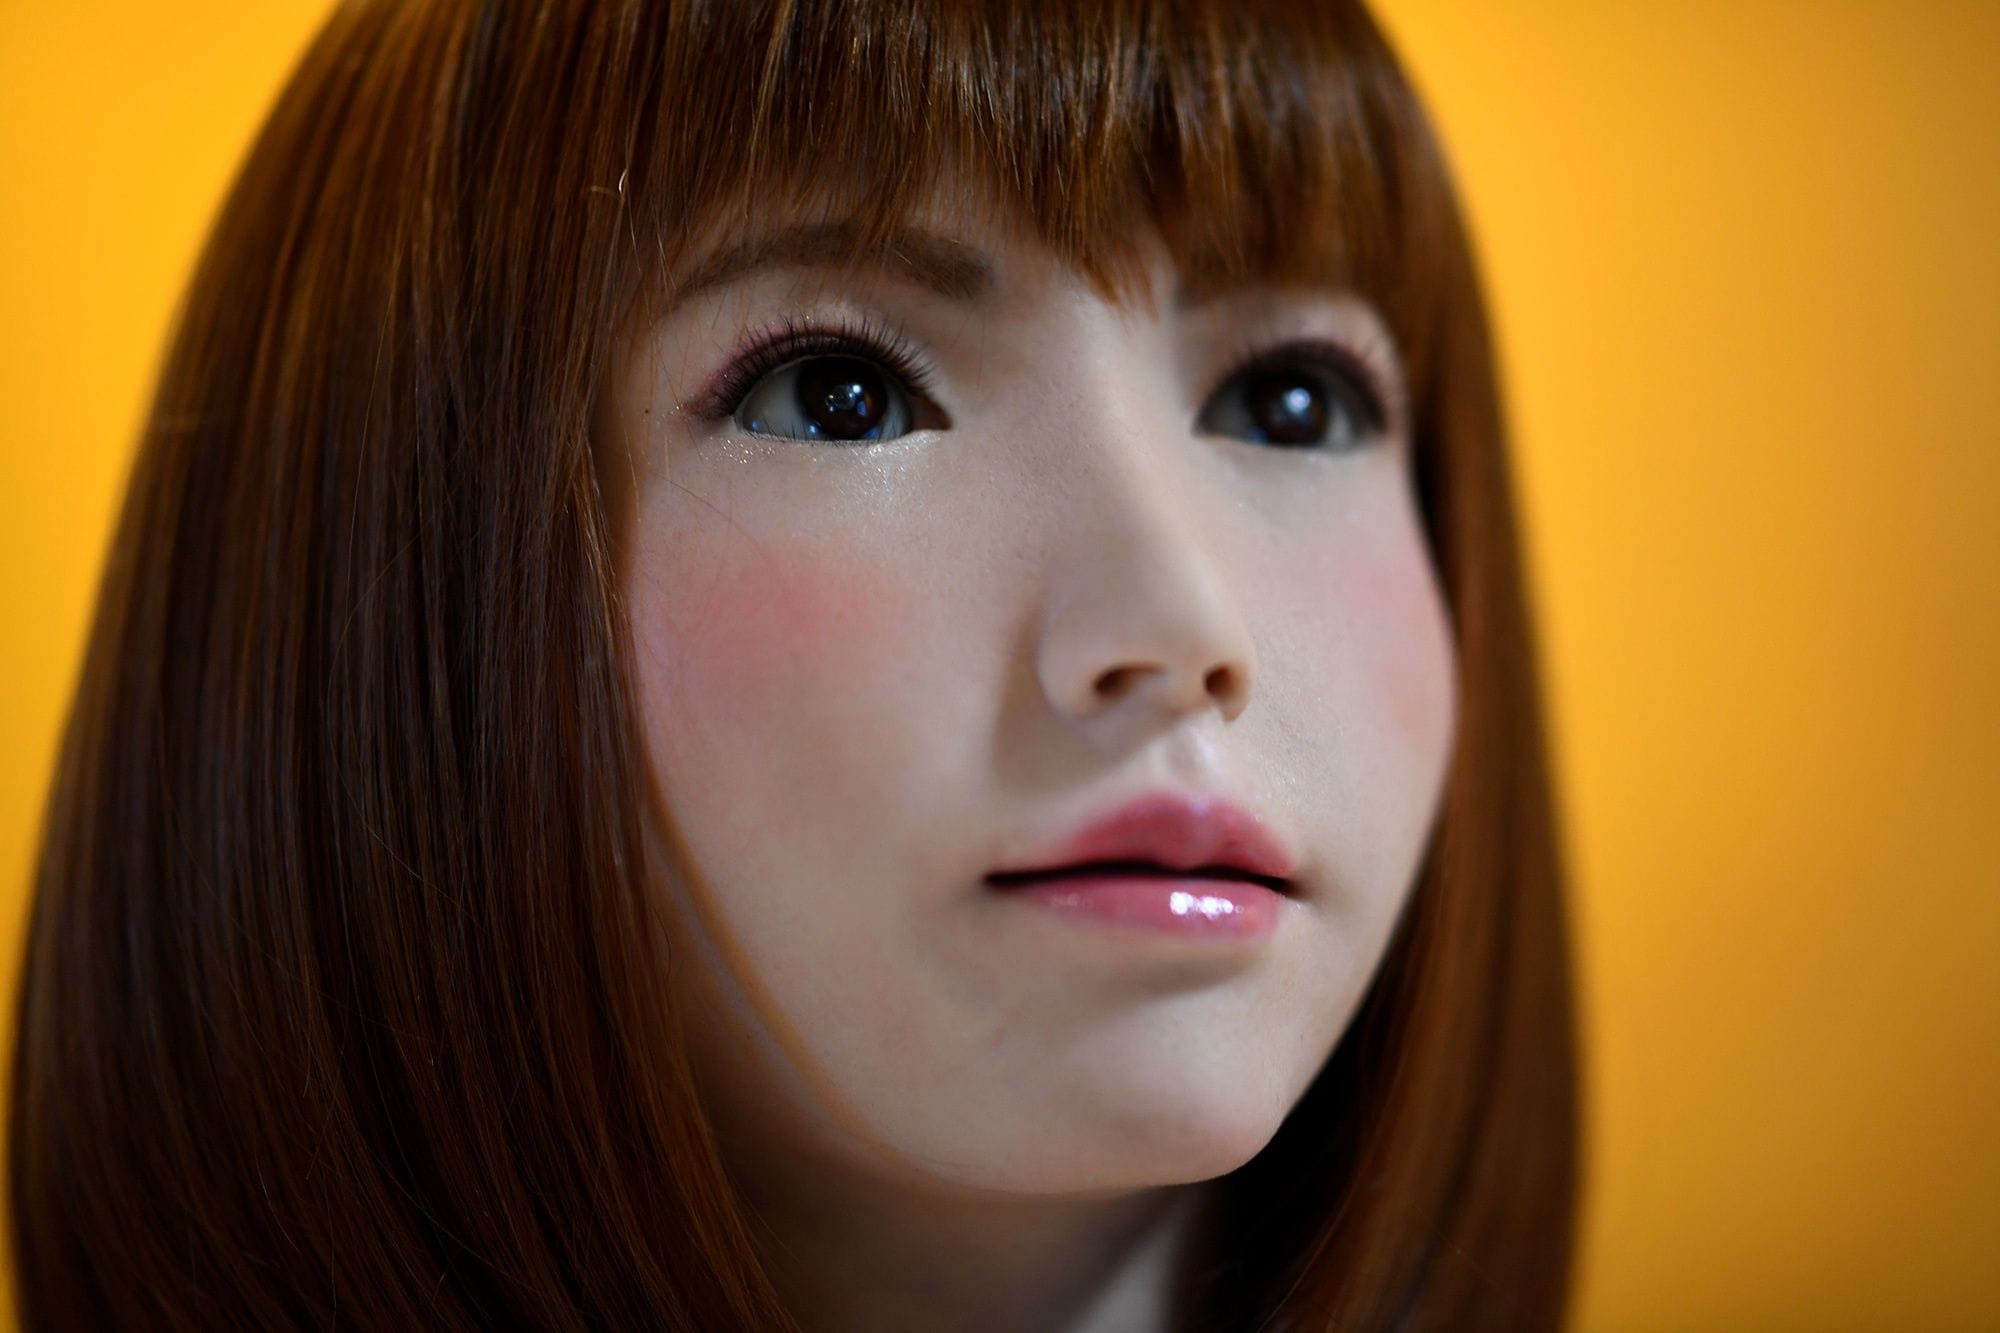 Erica, the AI-powered robot set to star in the upcoming film 